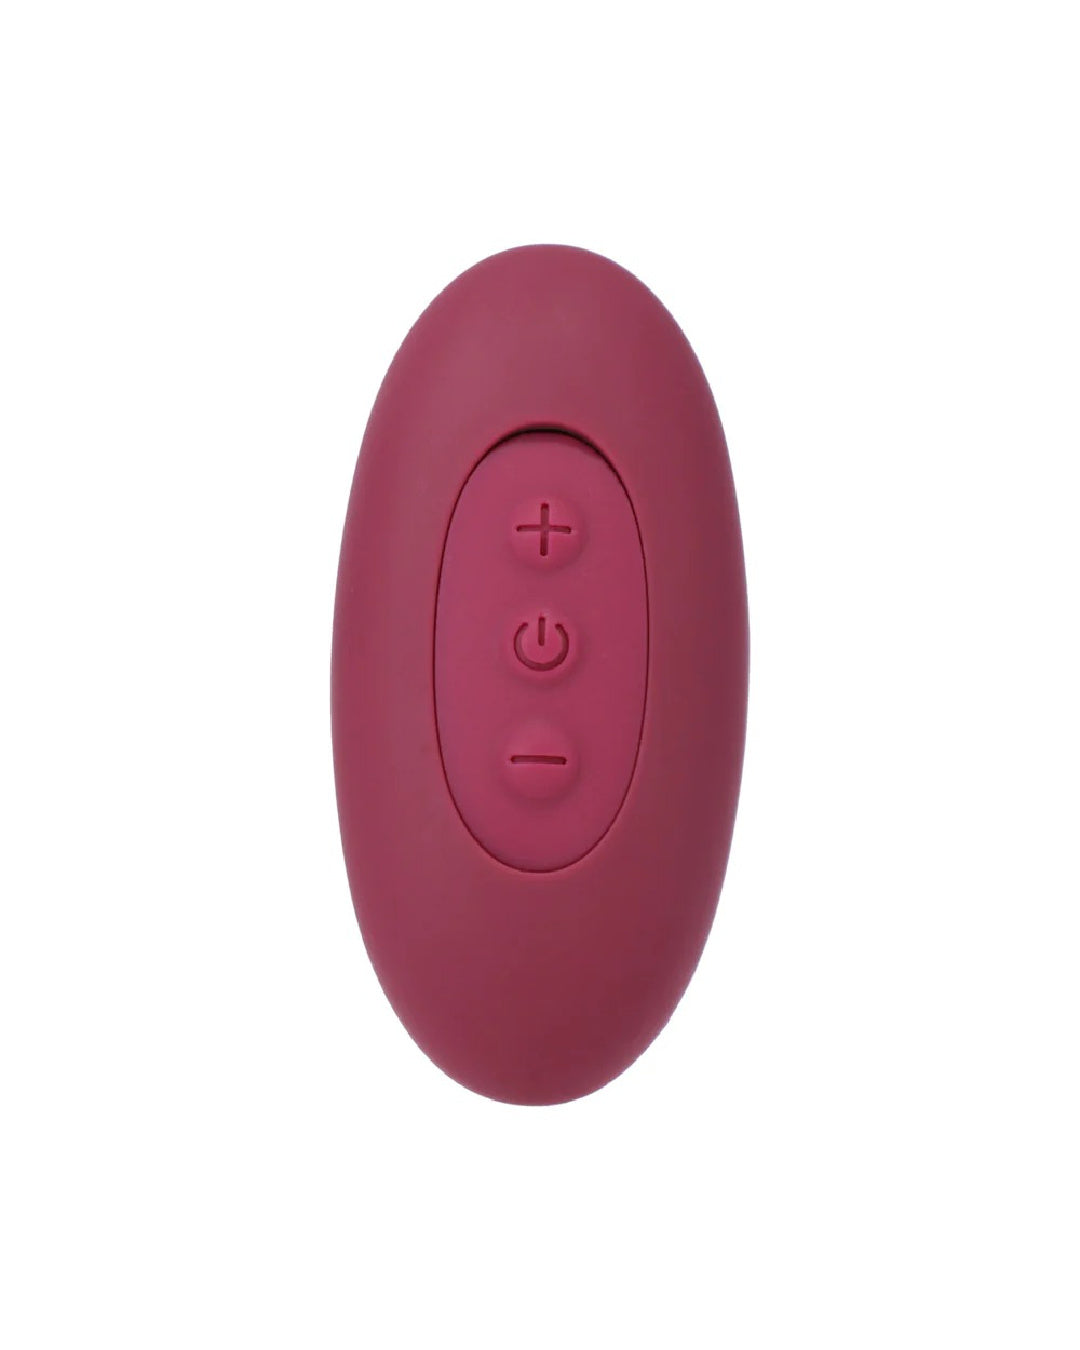 Tryst Duet Double Ended Vibrator with Remote - Remote control, top + button increases speed, middle power button turns it on and off and lowest - button lowers the speed